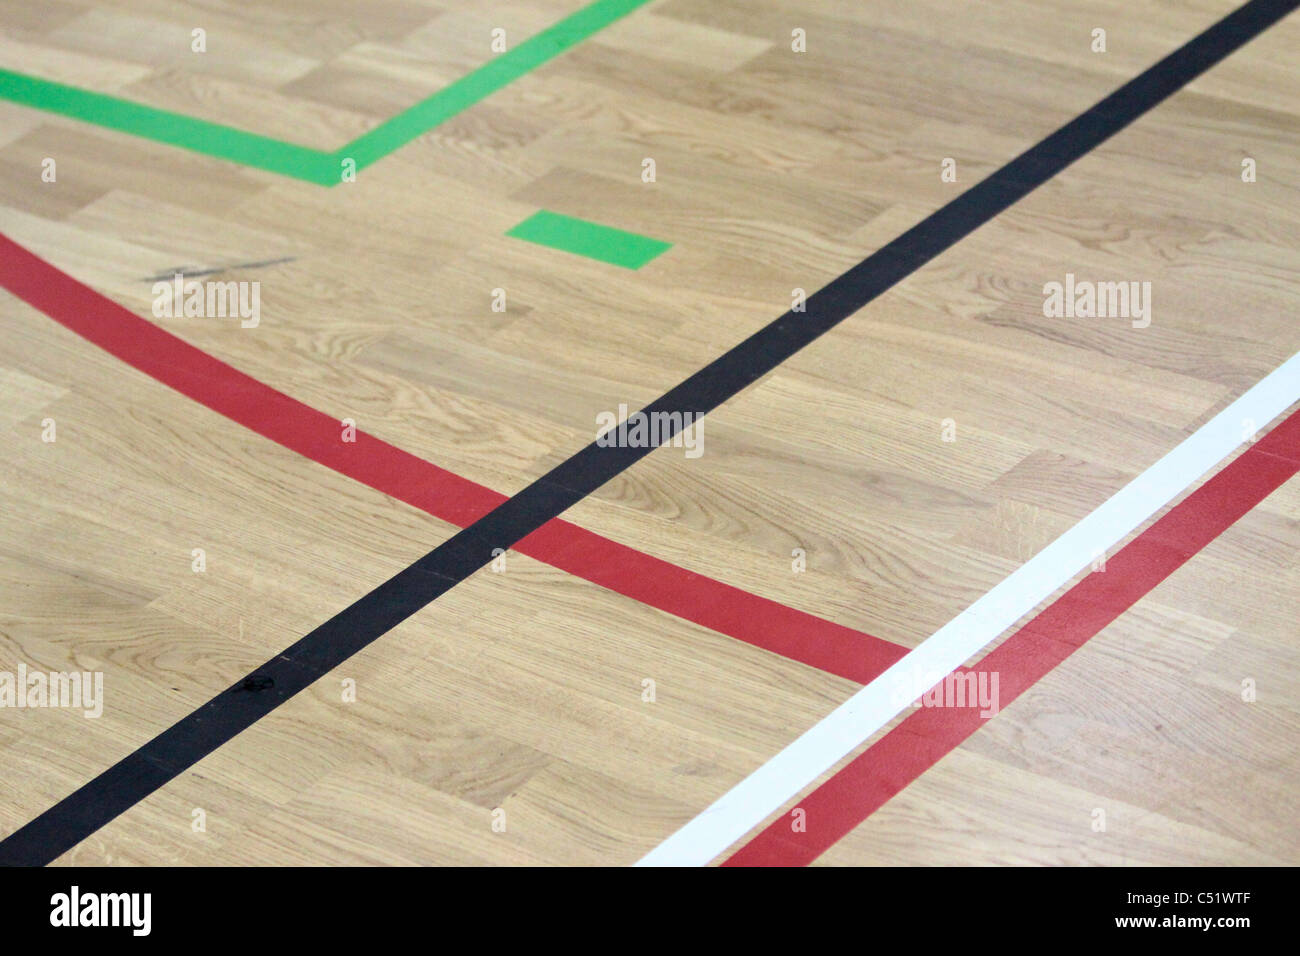 Line markings in a sports hall Stock Photo